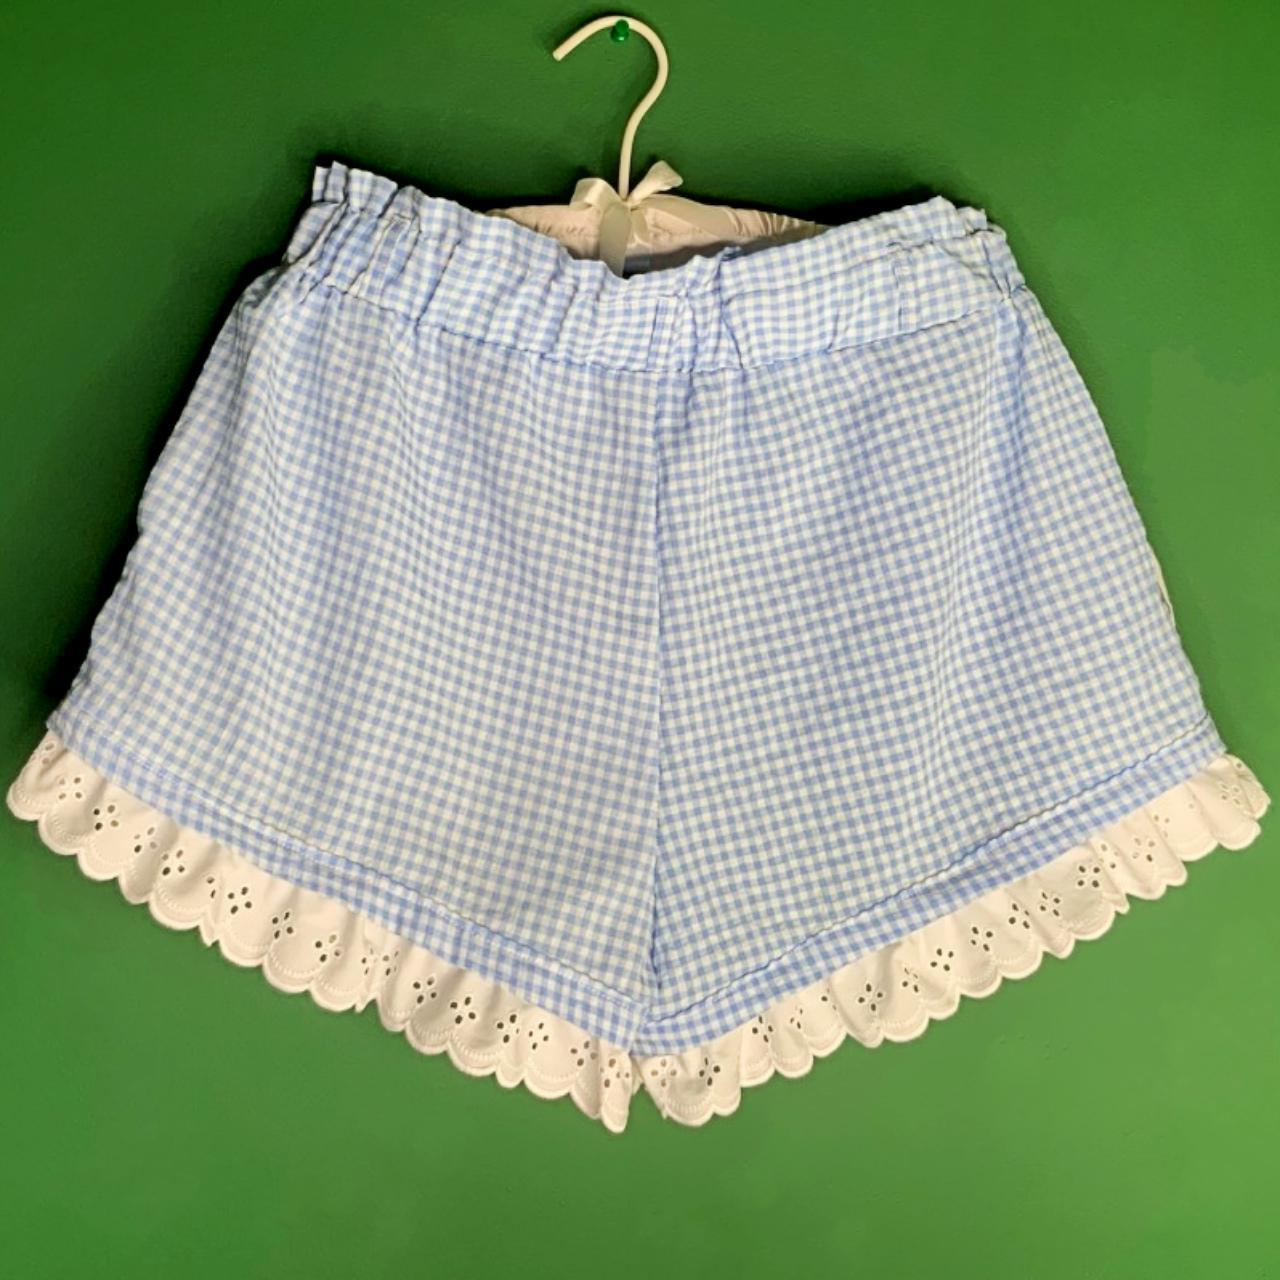 Dizzy Lizzy Women's Blue and White Shorts (4)